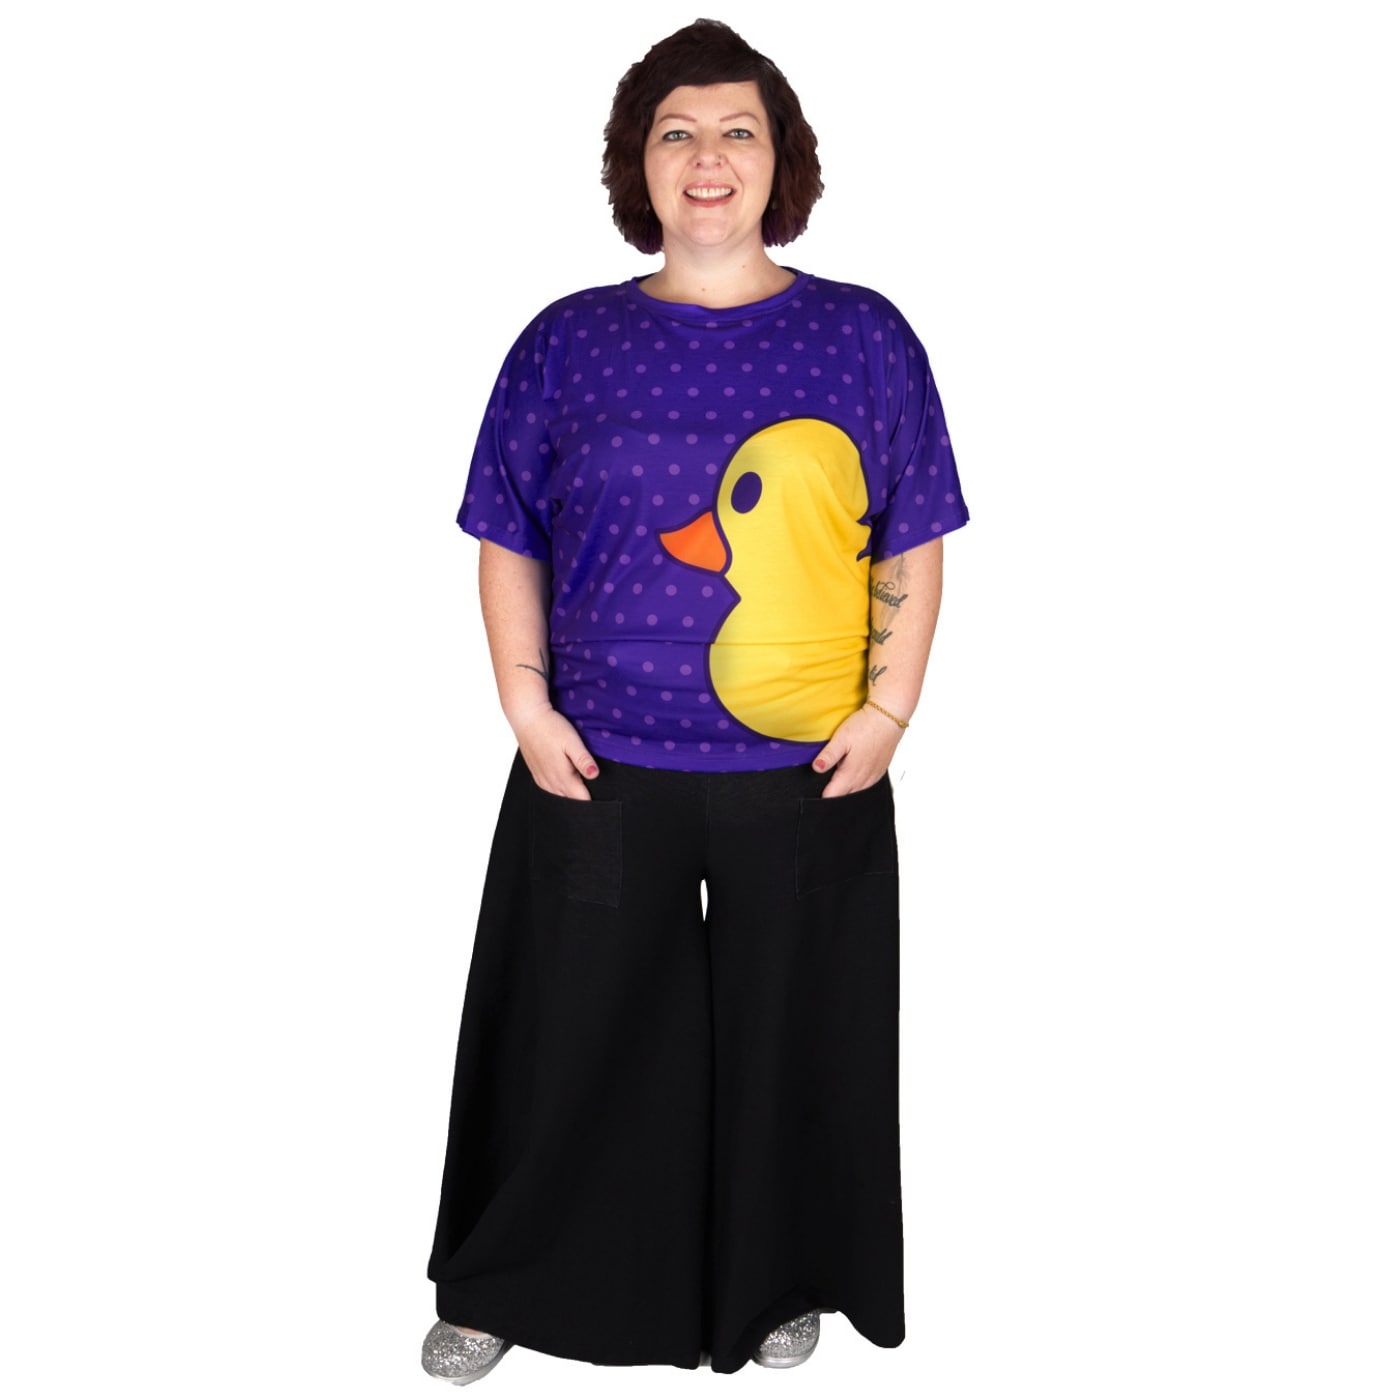 Yellow Ducky Batwing Top by RainbowsAndFairies.com.au (Yellow Duck - Rubber Duck - Ducky - Purple - Vintage Inspired - Kitsch - Knit Top - Mod) - SKU: CL_BATOP_DUCKY_YEL - Pic-02